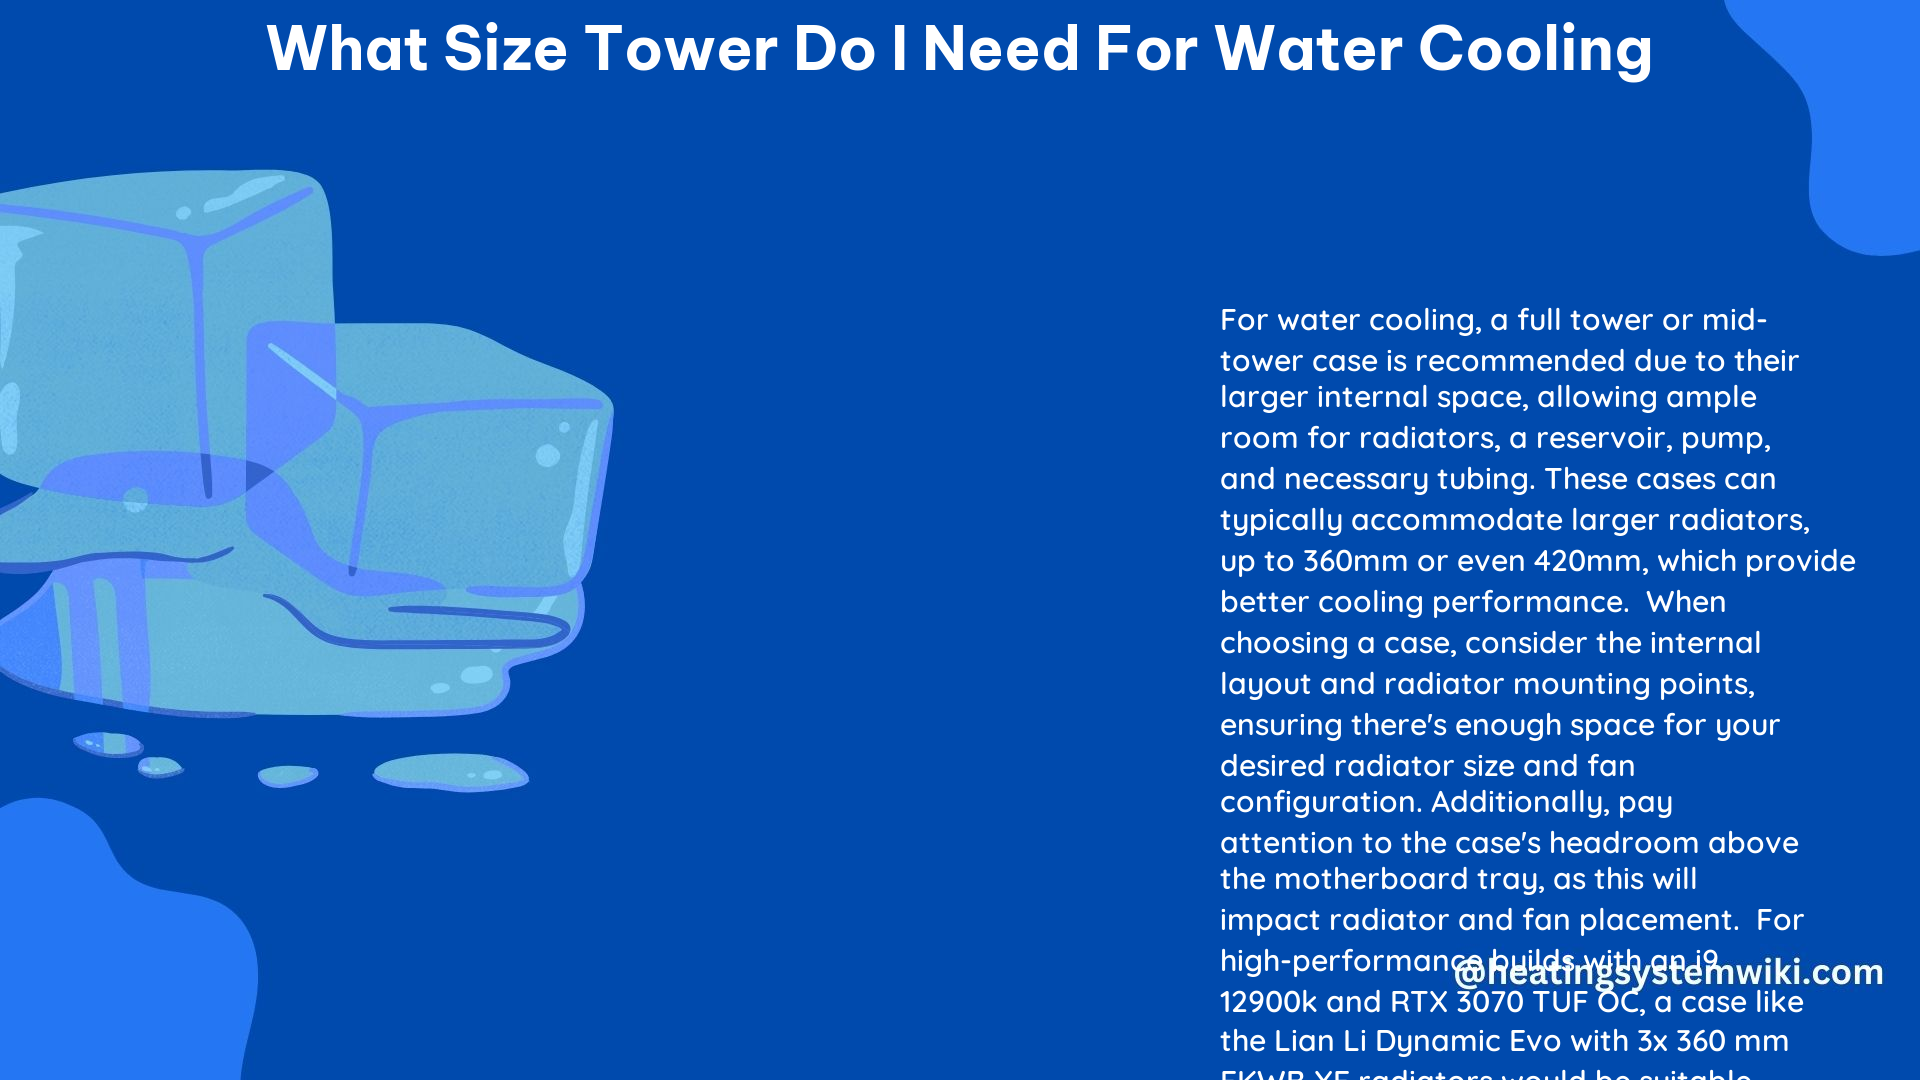 What Size Tower Do I Need for Water Cooling